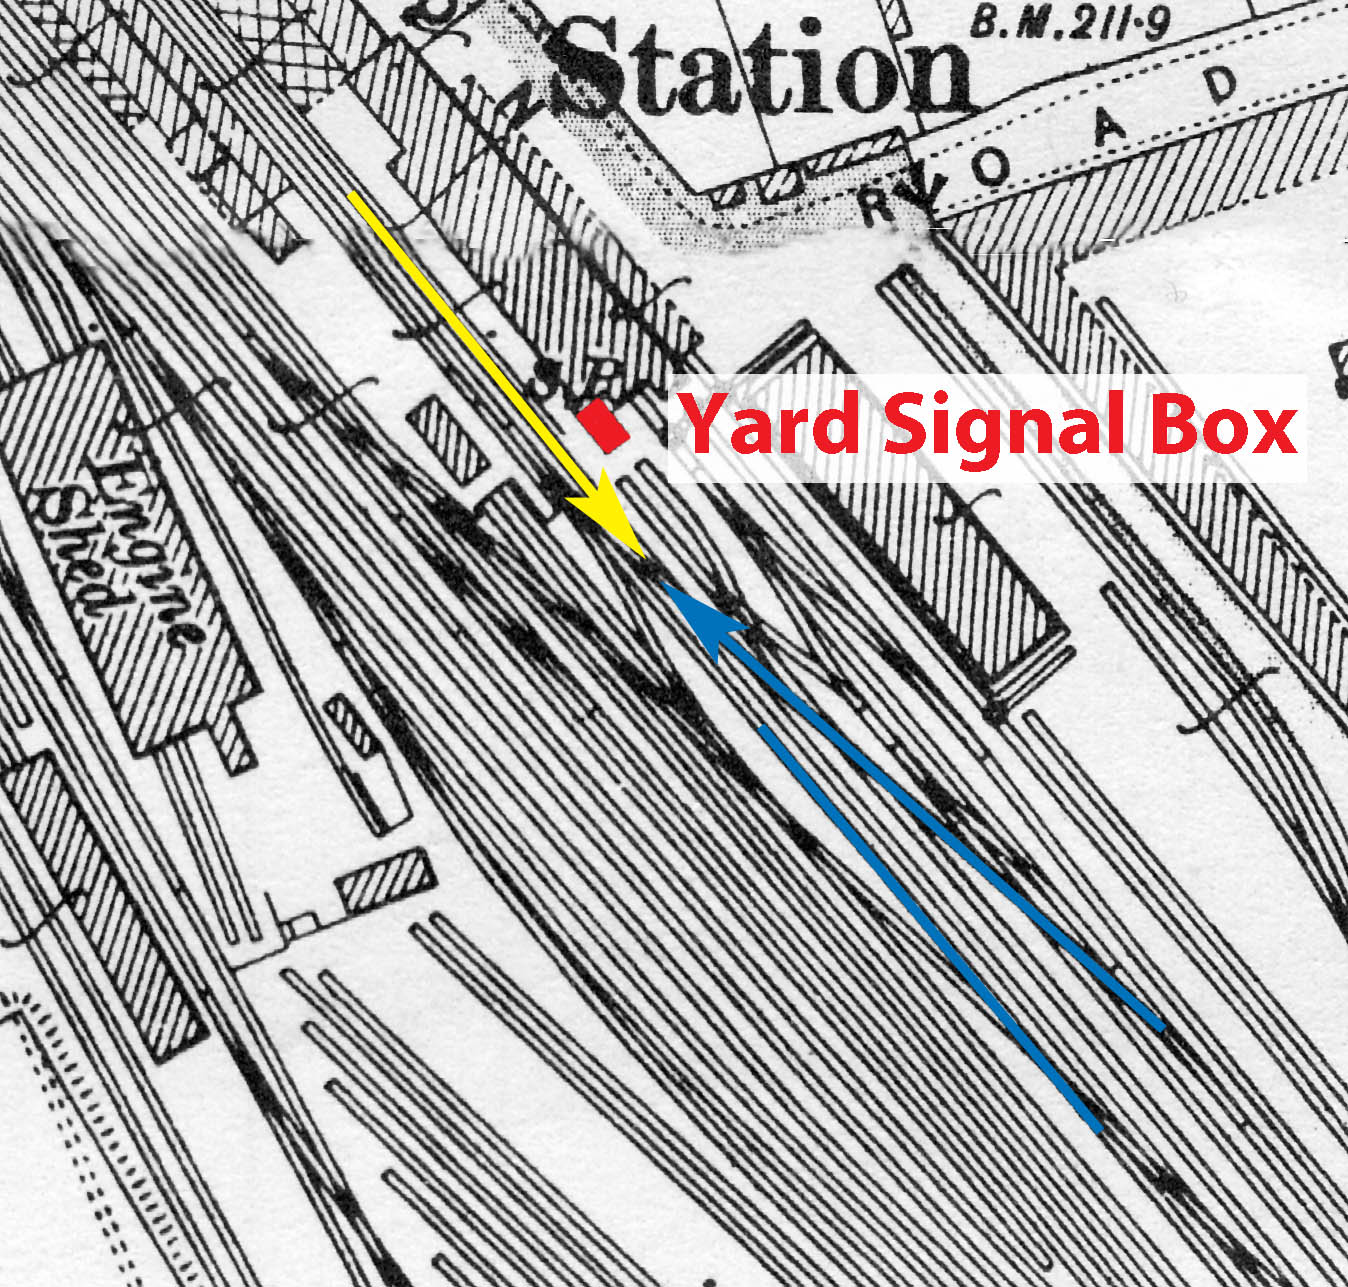 This diagram shows how the two trains collided. The Manchester to London train (yellow arrow) left the station. The goods locomotve (blue arrow) was hauling wagons from No.2 siding to the Down Main line, where it had left its train (also blue) while it collected the wagons from Grantham goods yard.